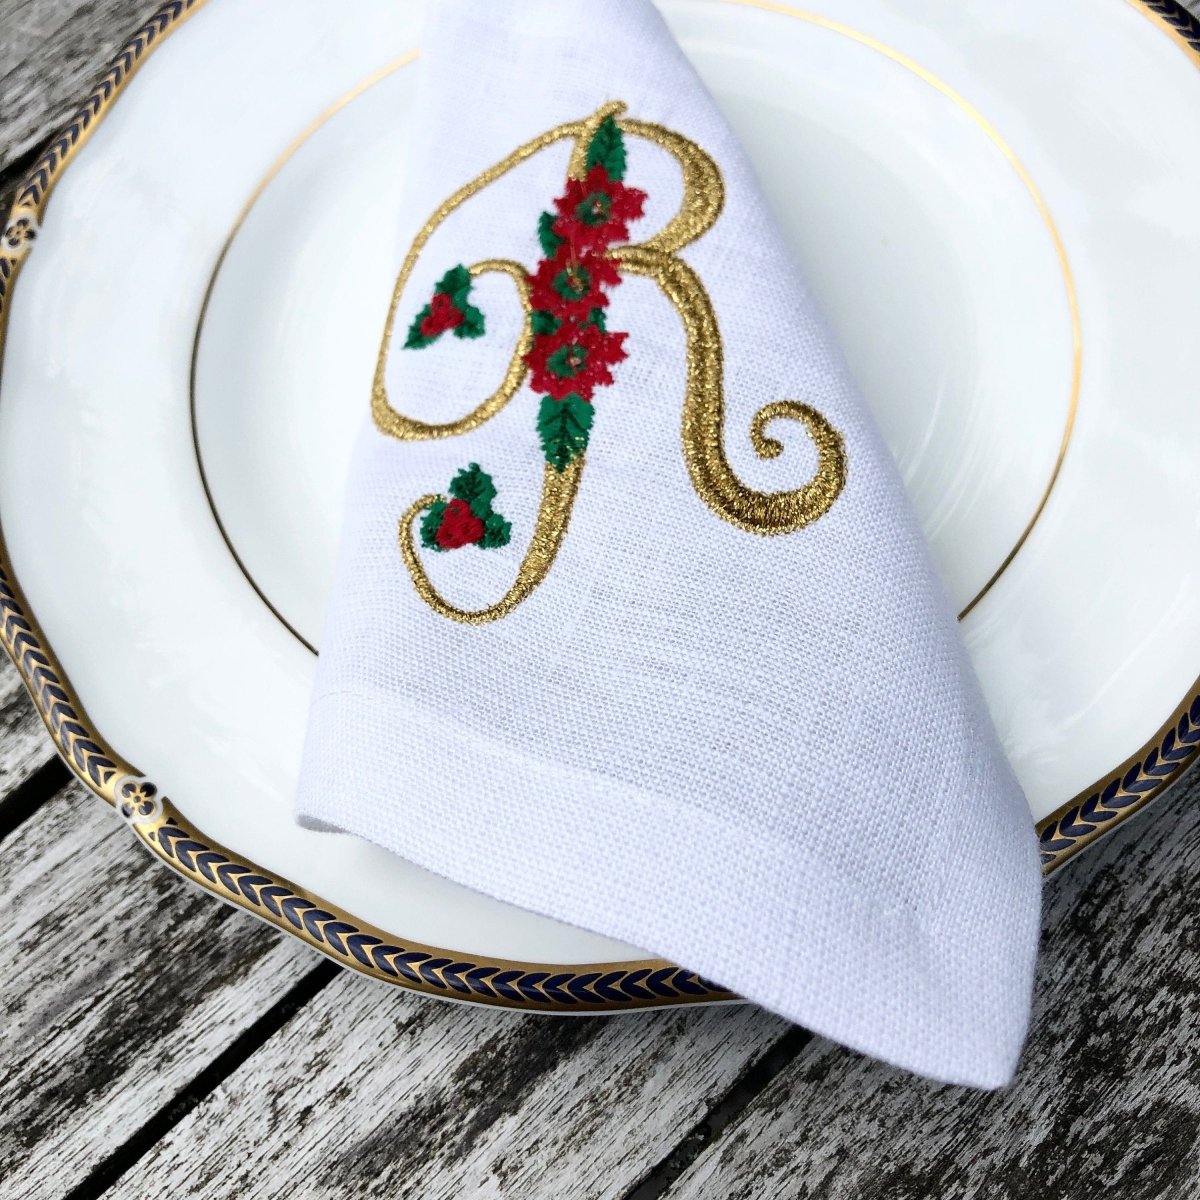 Christmas in the Country Embroidered Cotton/Linen Napkins - Set of 4